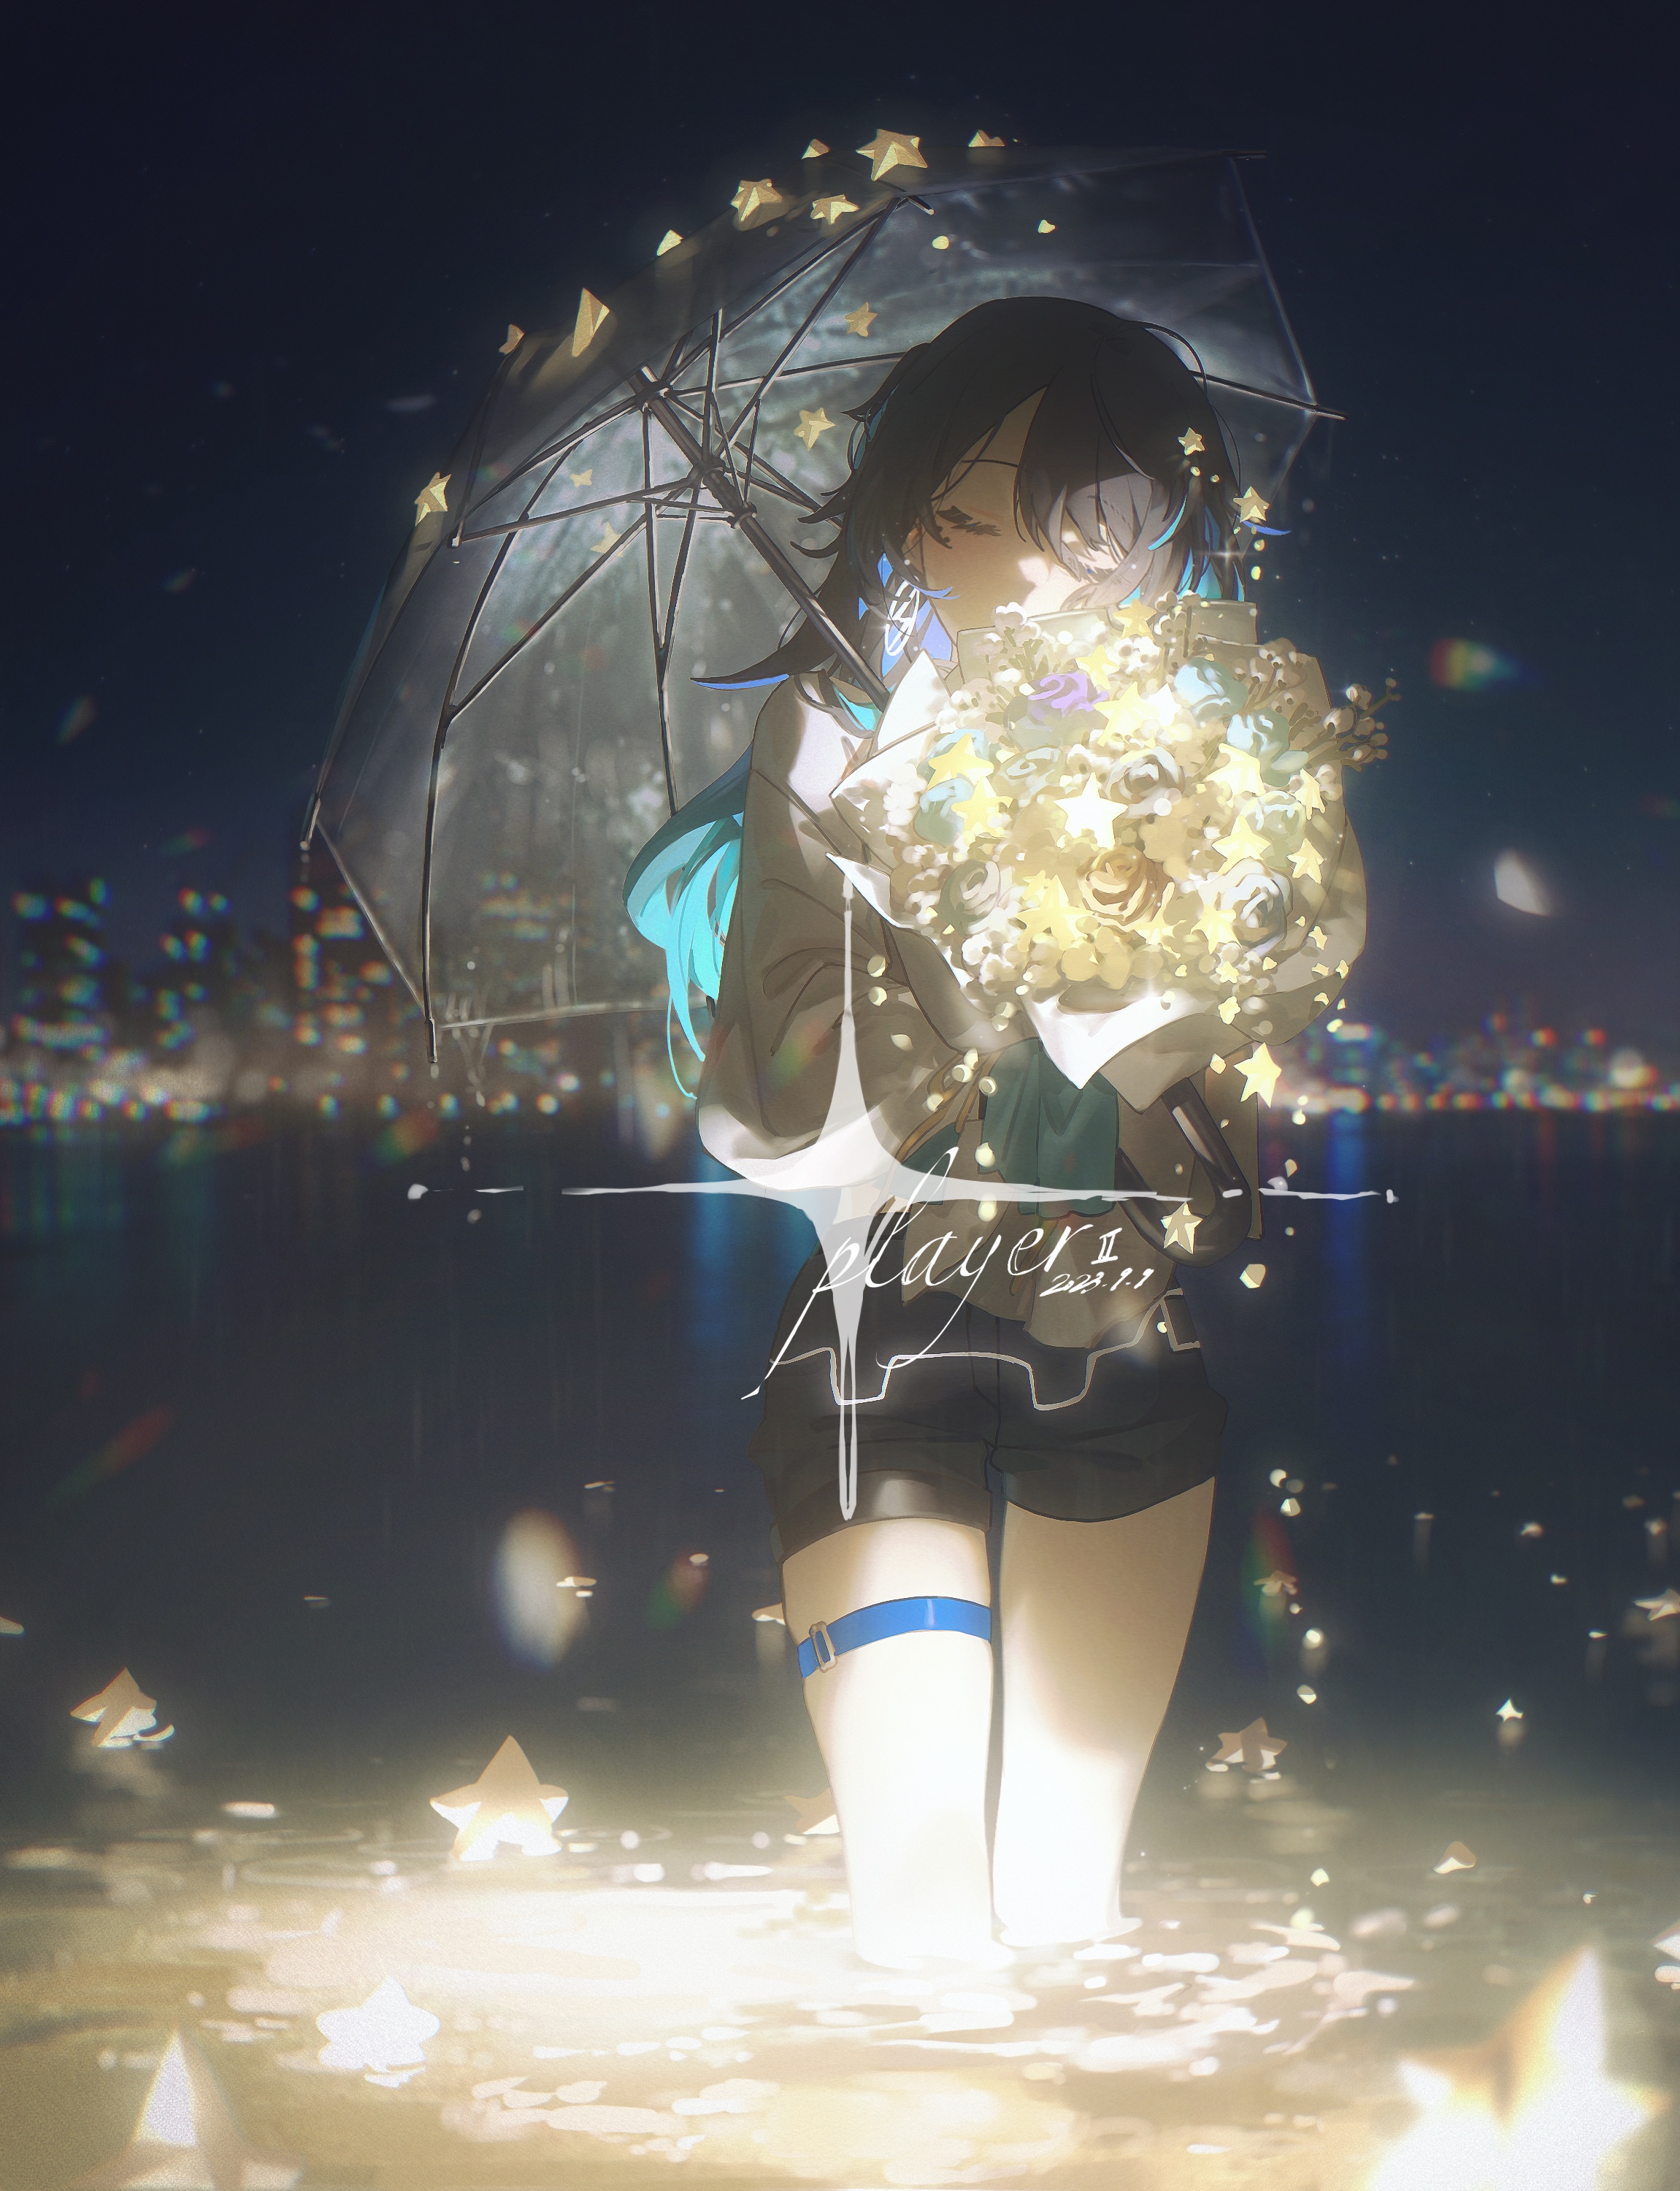 Anime 2301x3000 anime anime girls Pixiv colorful umbrella closed eyes flowers standing water standing in water night blurred blurry background long hair stars earring signature